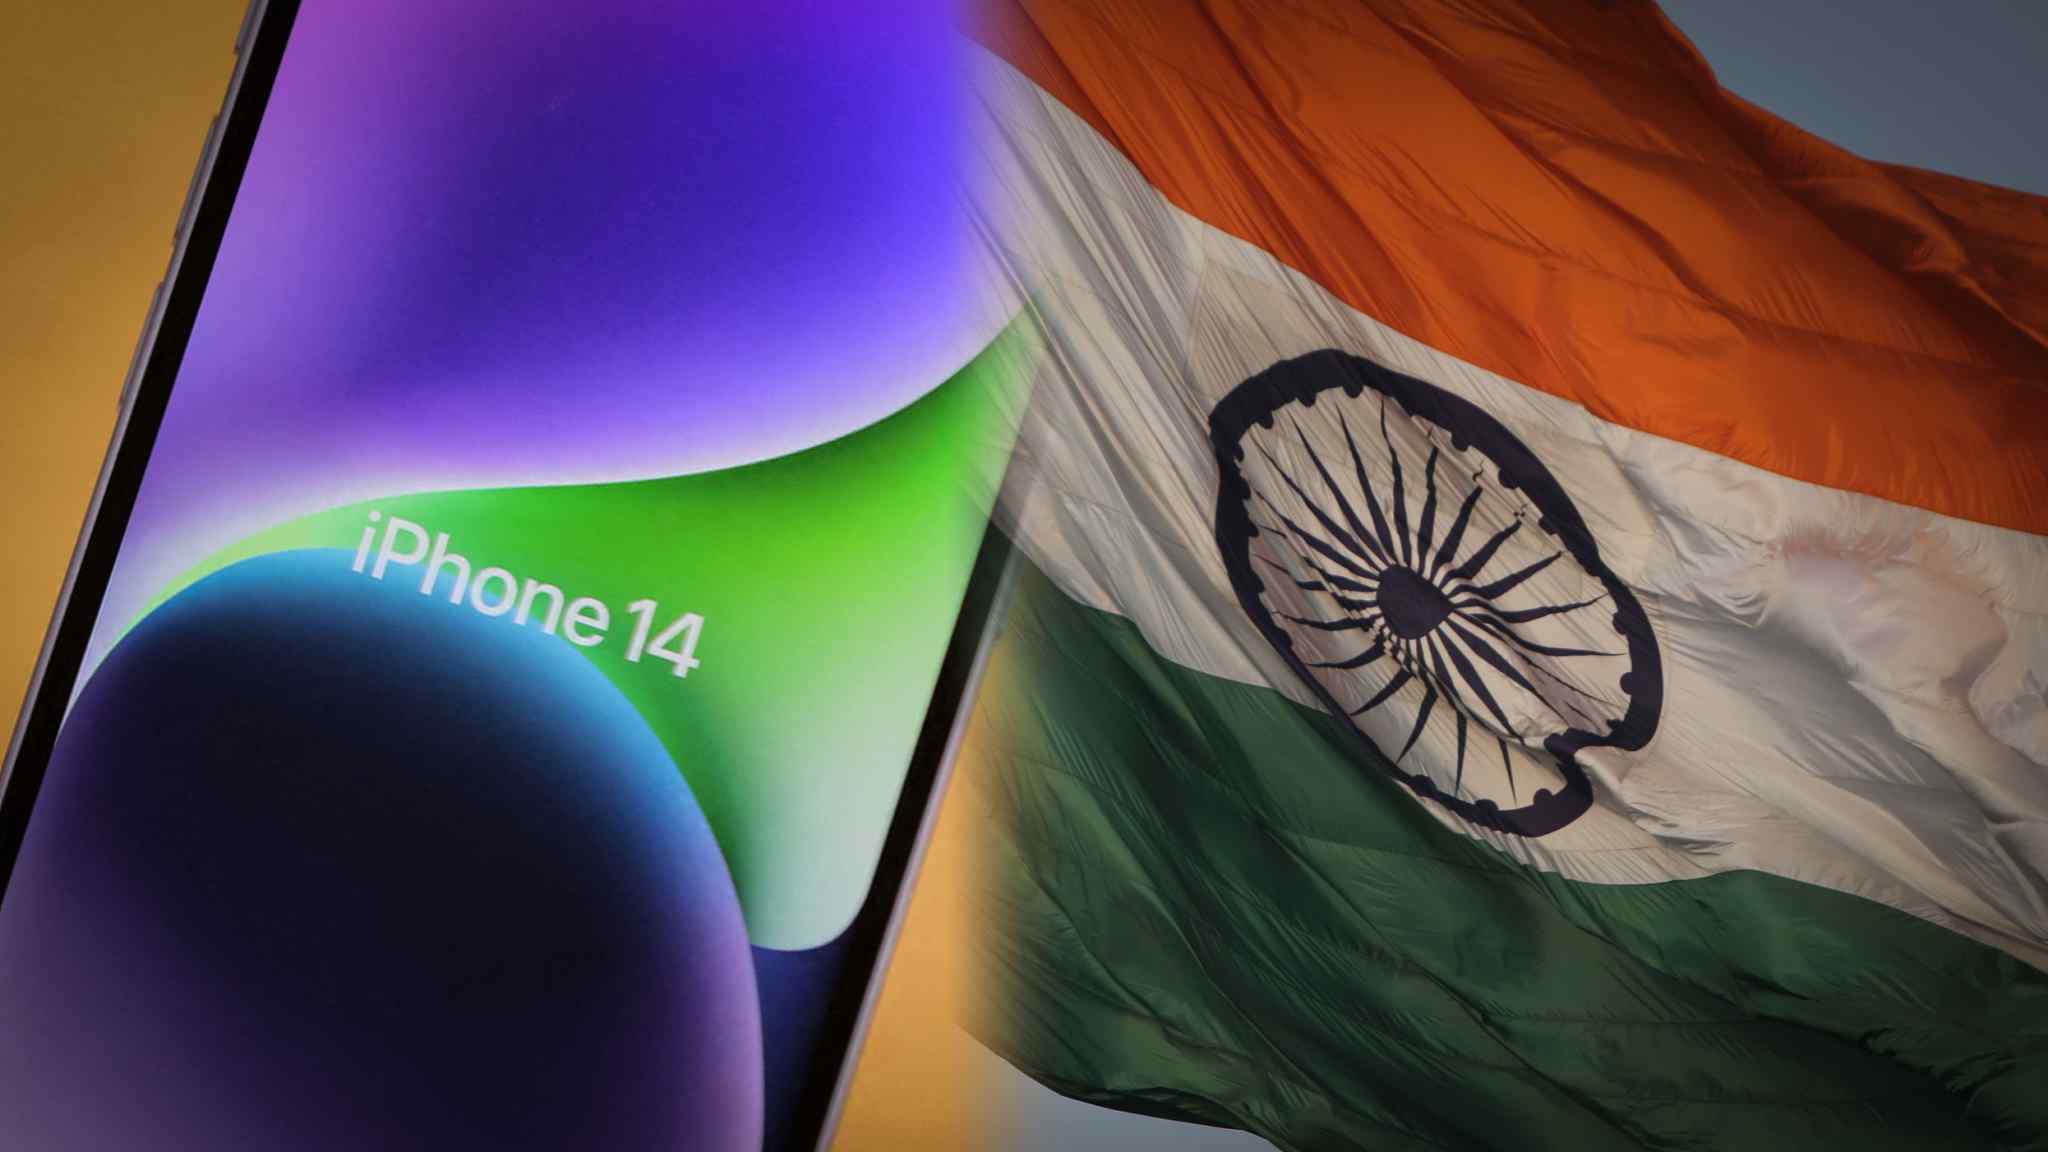 Apple already building latest iPhone 14 in India